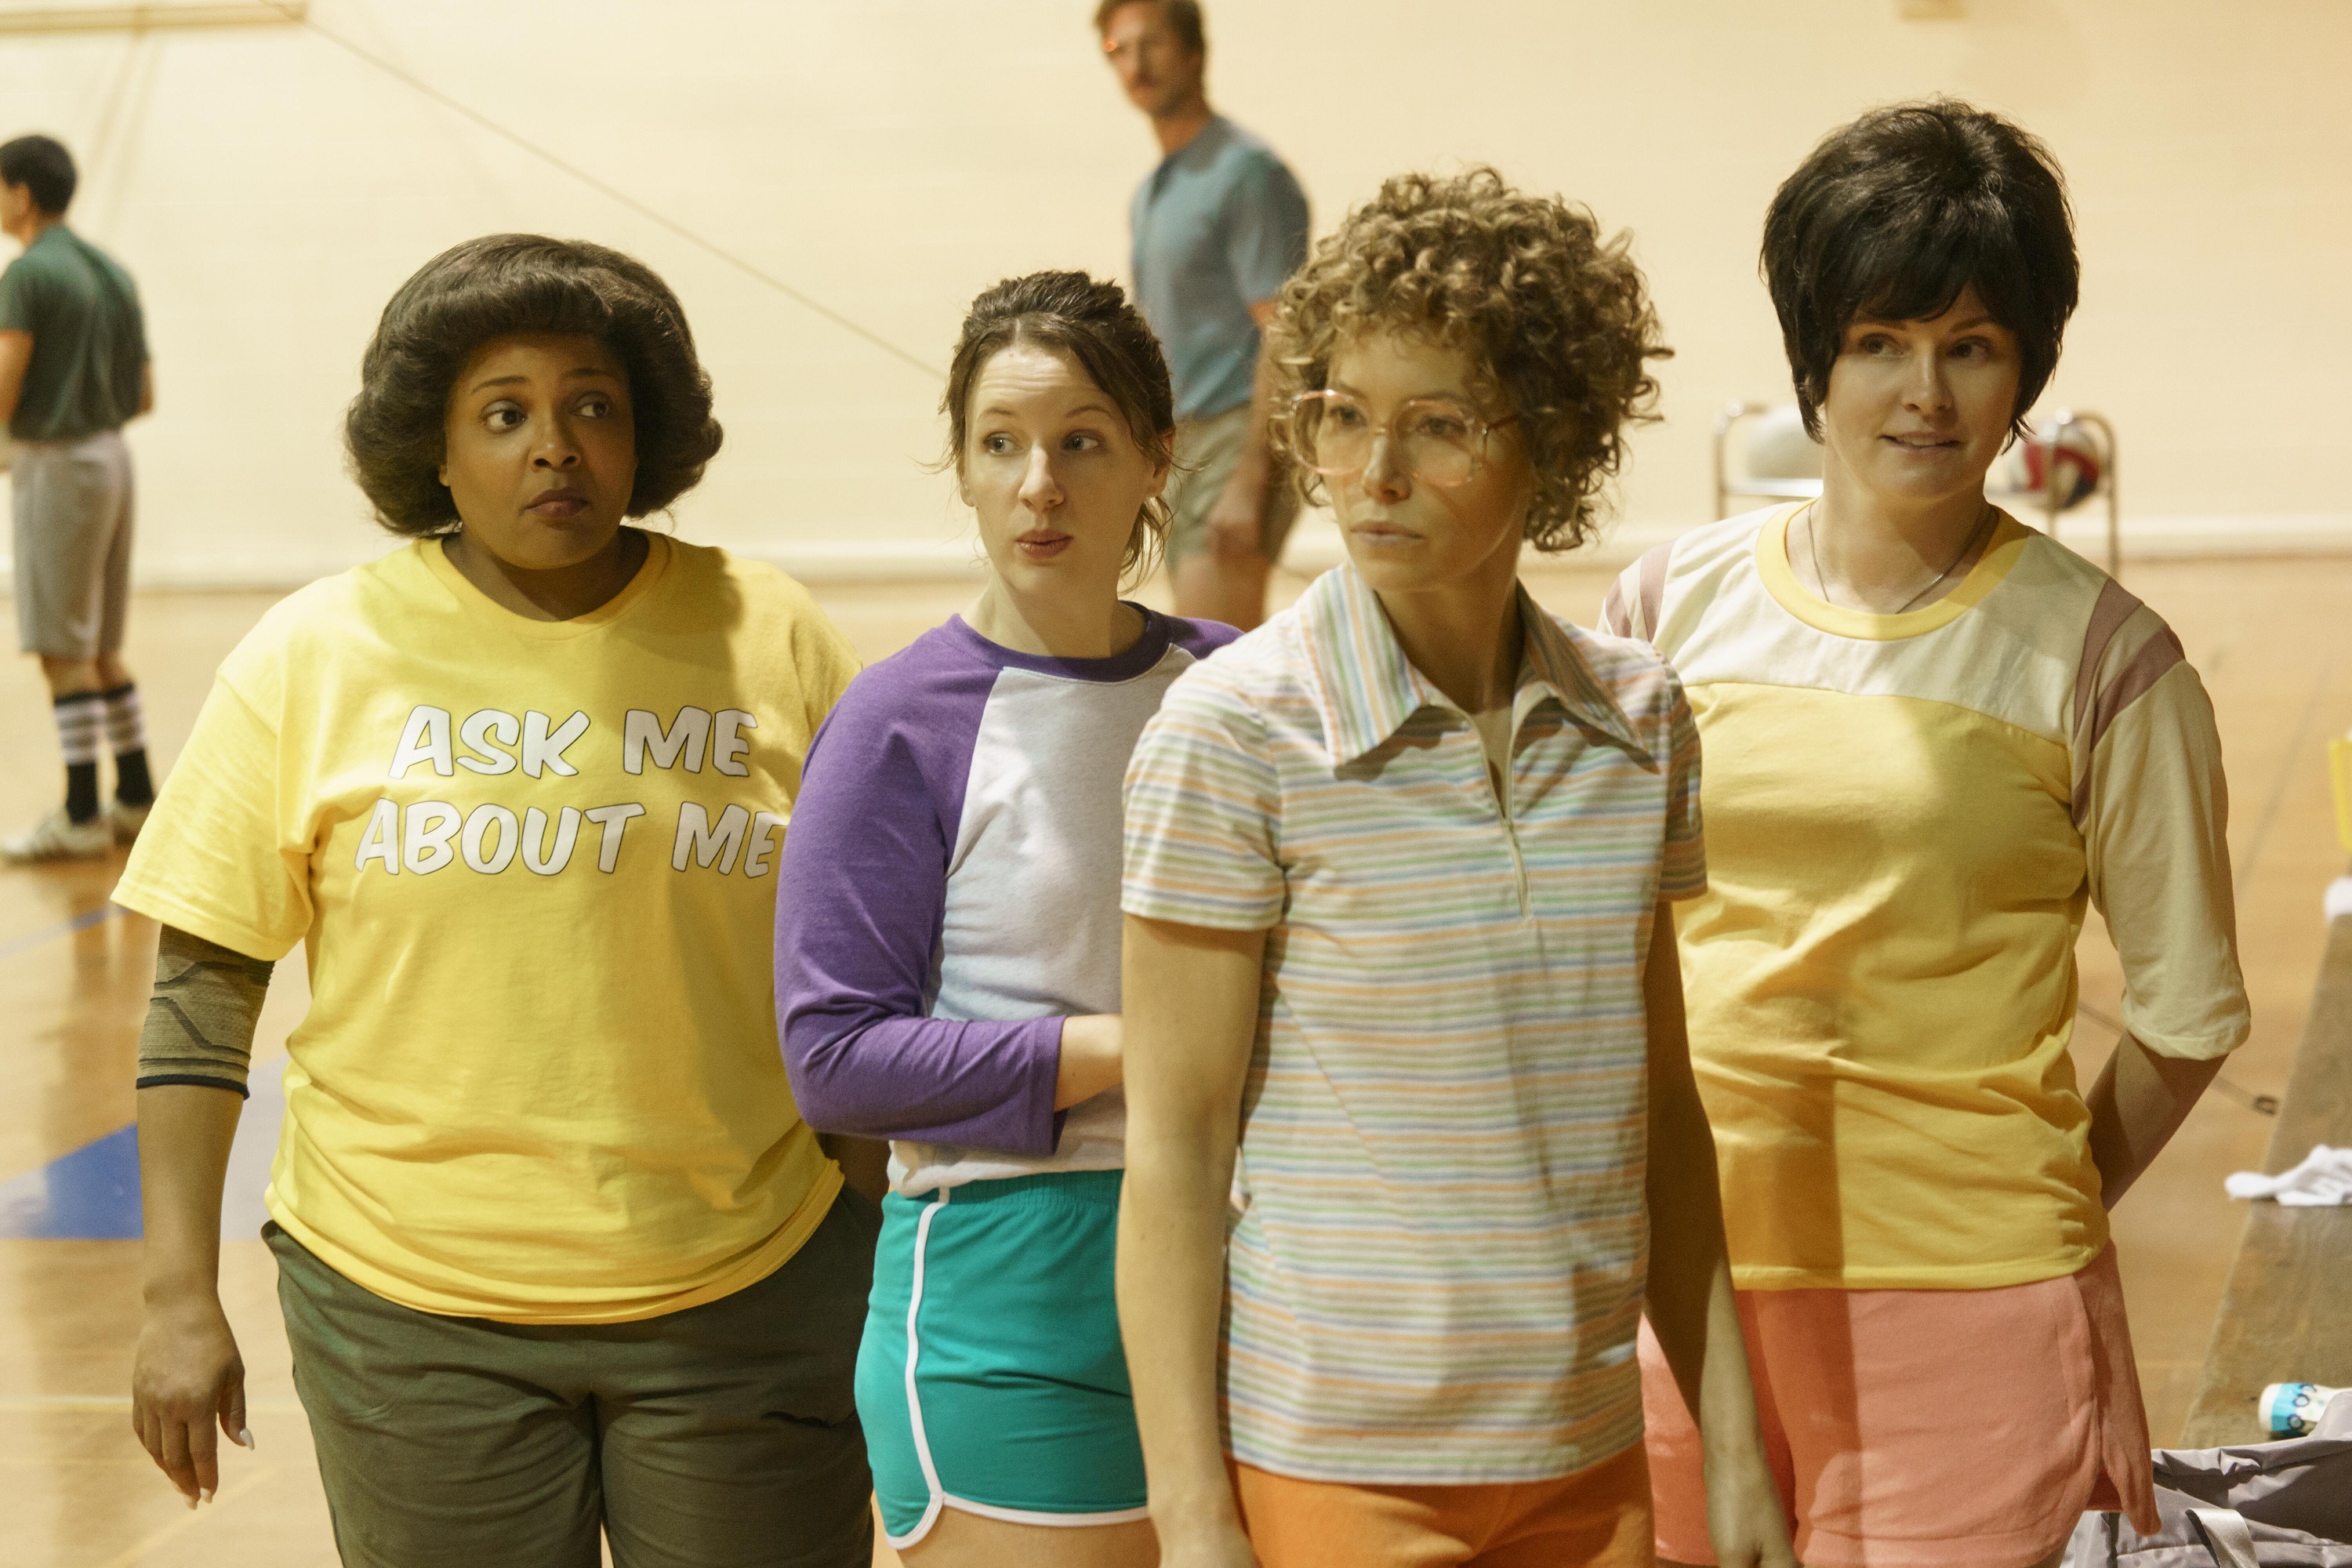 'Candy' Cast members on Hulu stand together looking at something; Sharon Conley as Sandra, Jessie Mueller as Sherry, Jessica Biel as Candy and Jamie Anne Allman as Elaine